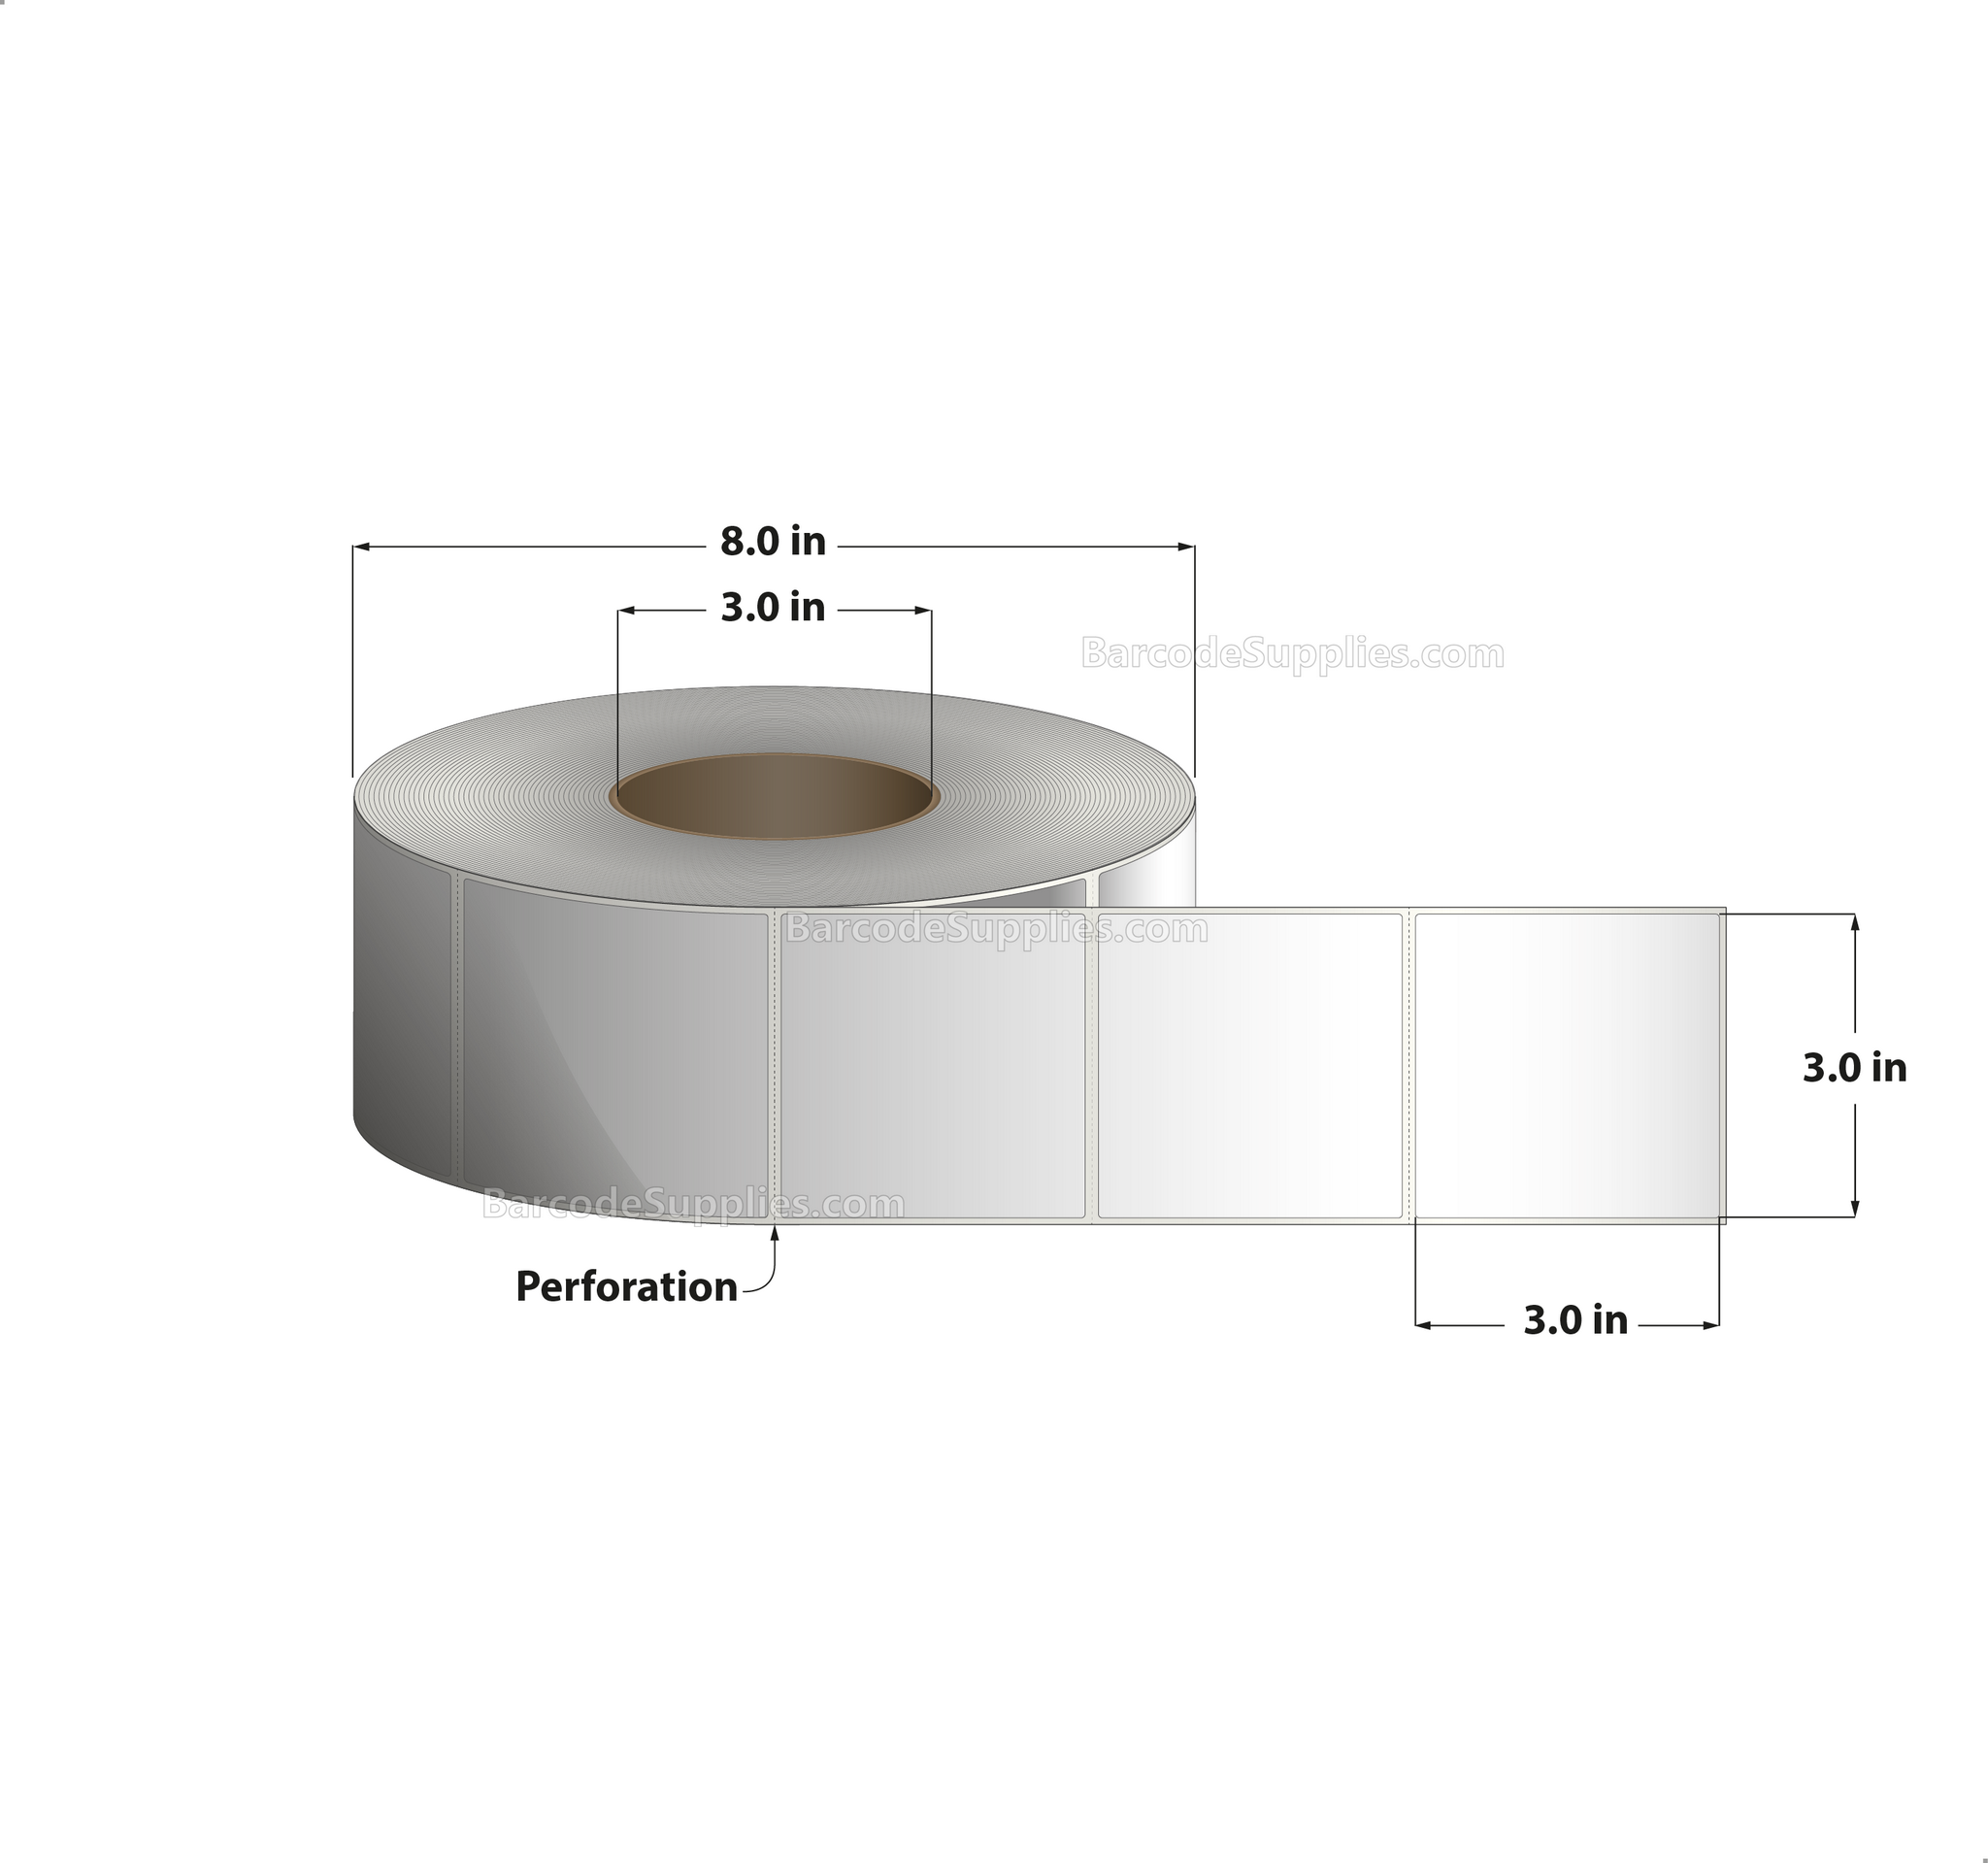 3 x 3 Thermal Transfer White Labels With Permanent Acrylic Adhesive - Perforated - 1900 Labels Per Roll - Carton Of 6 Rolls - 11400 Labels Total - MPN: TH33-1P